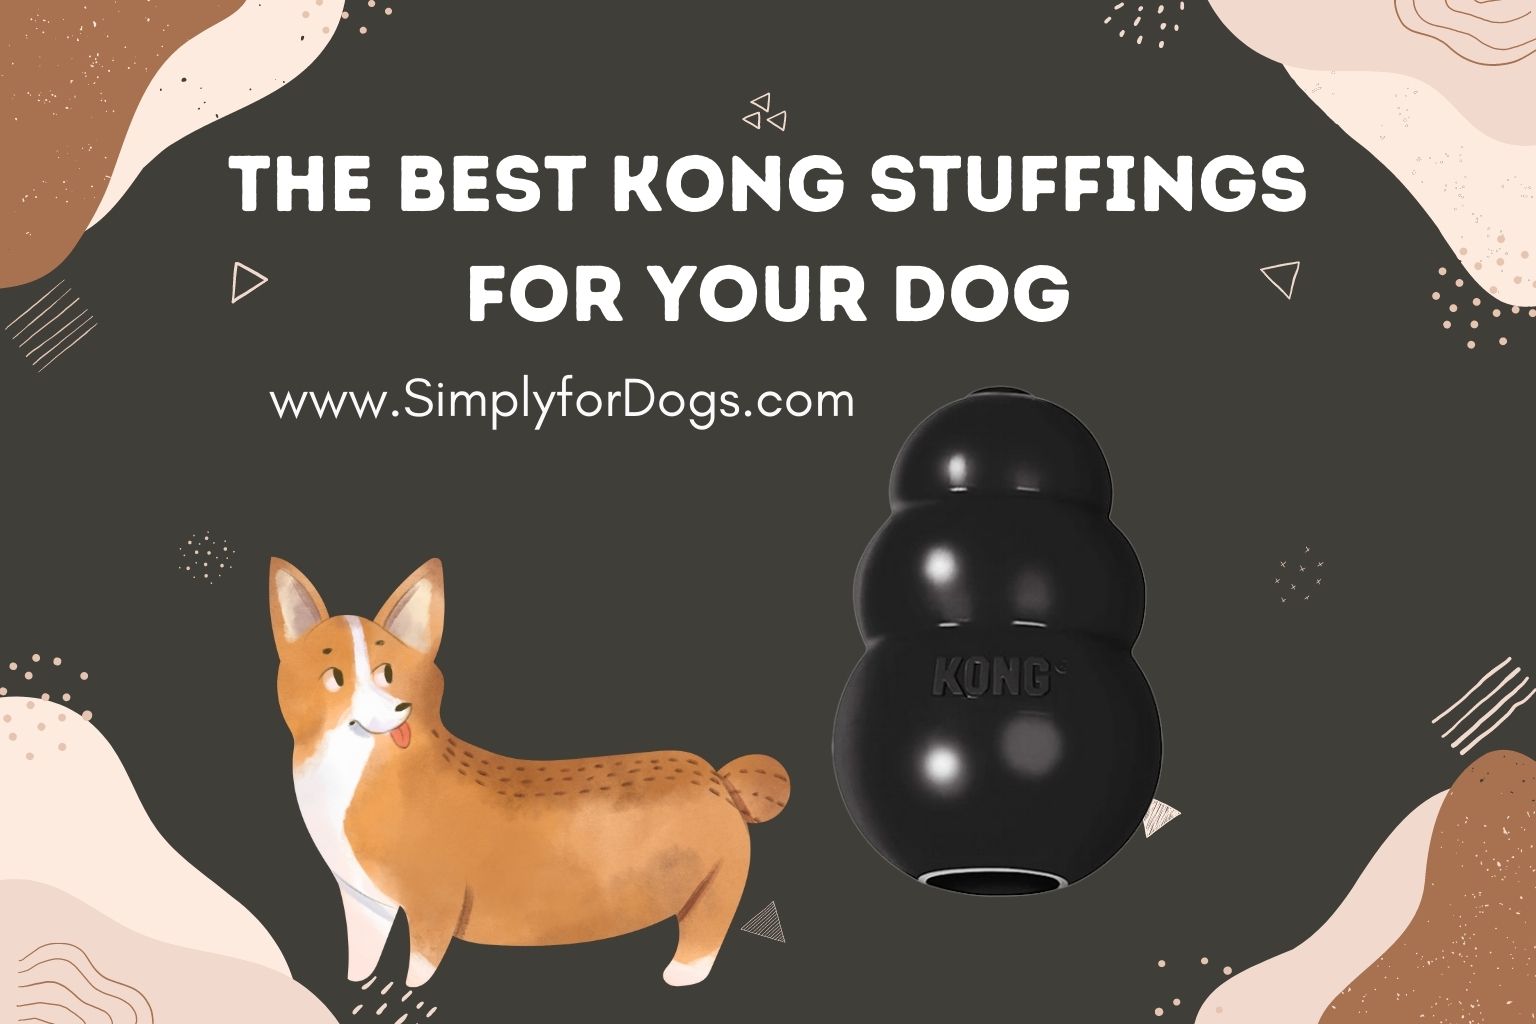 The Best Kong Stuffings for Your Dog